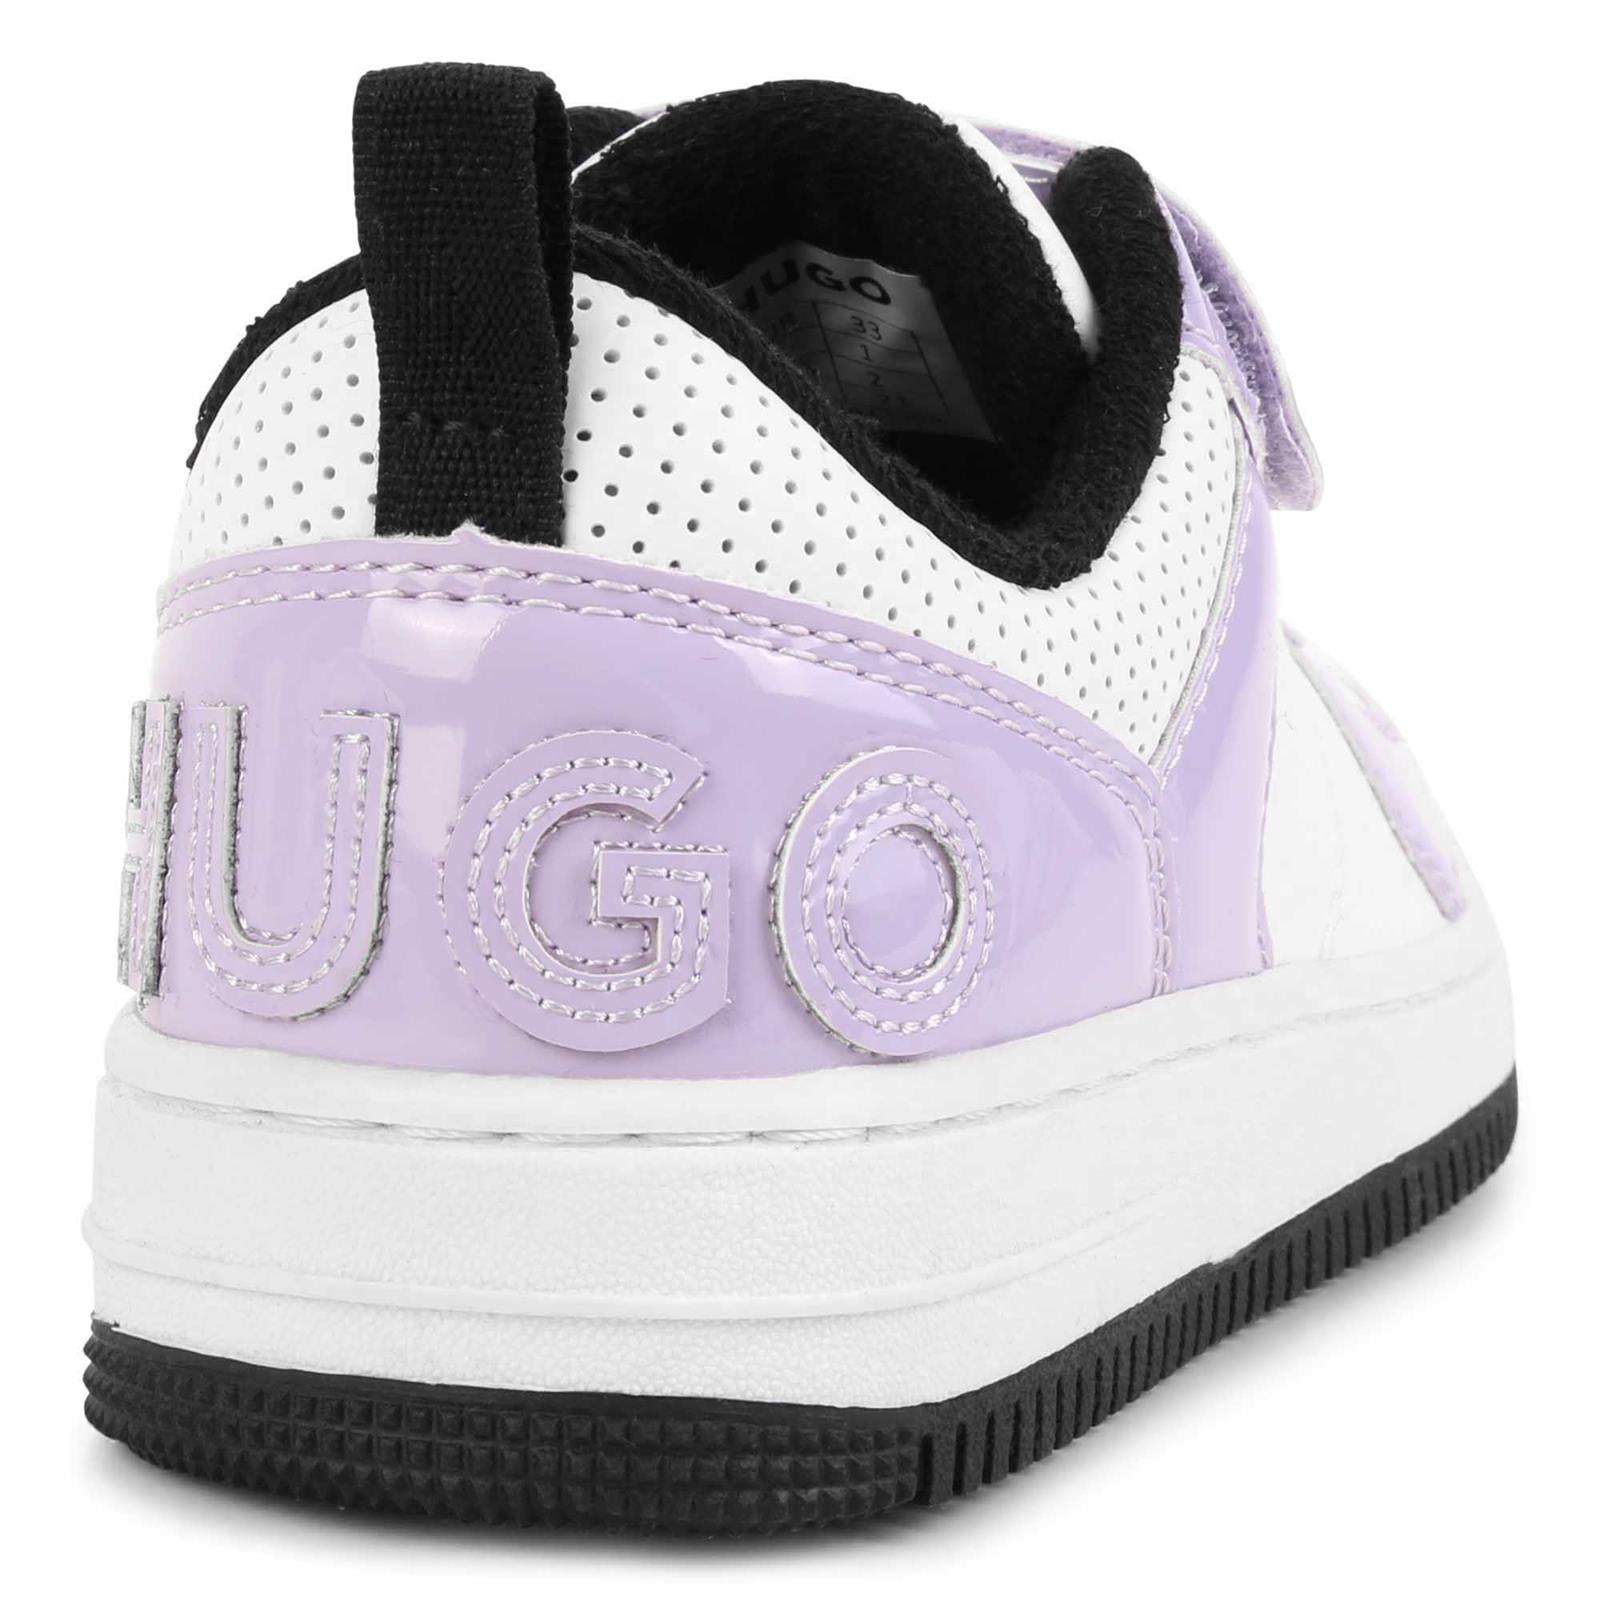 Hugo White and Lilac Sneakers